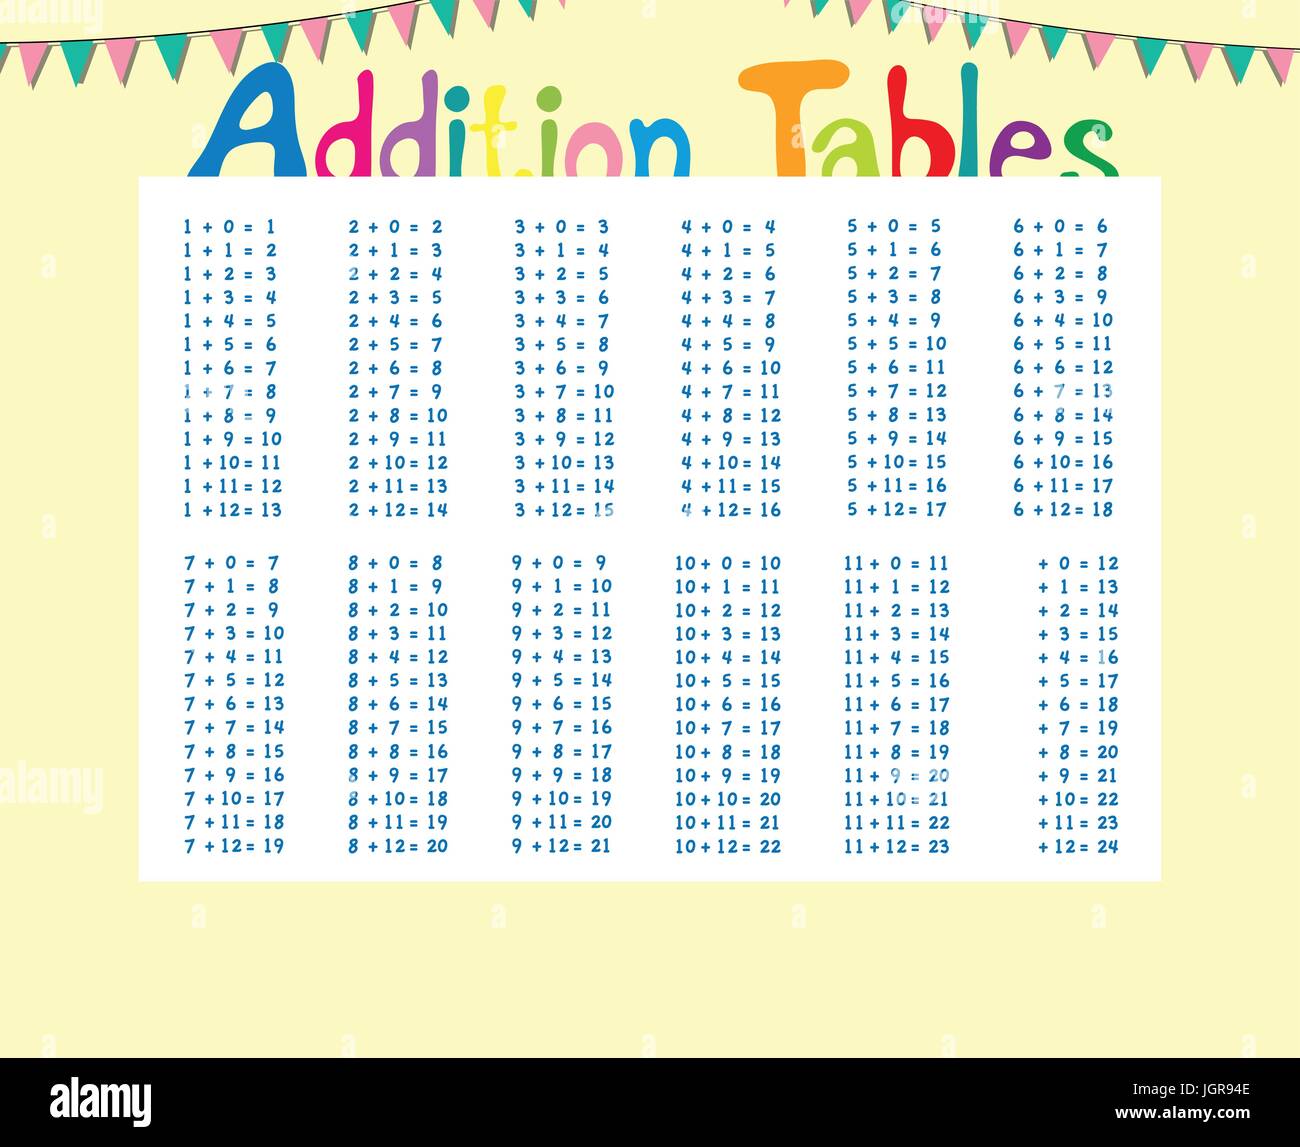 Addition tables chart with kids in background illustration Stock Vector ...